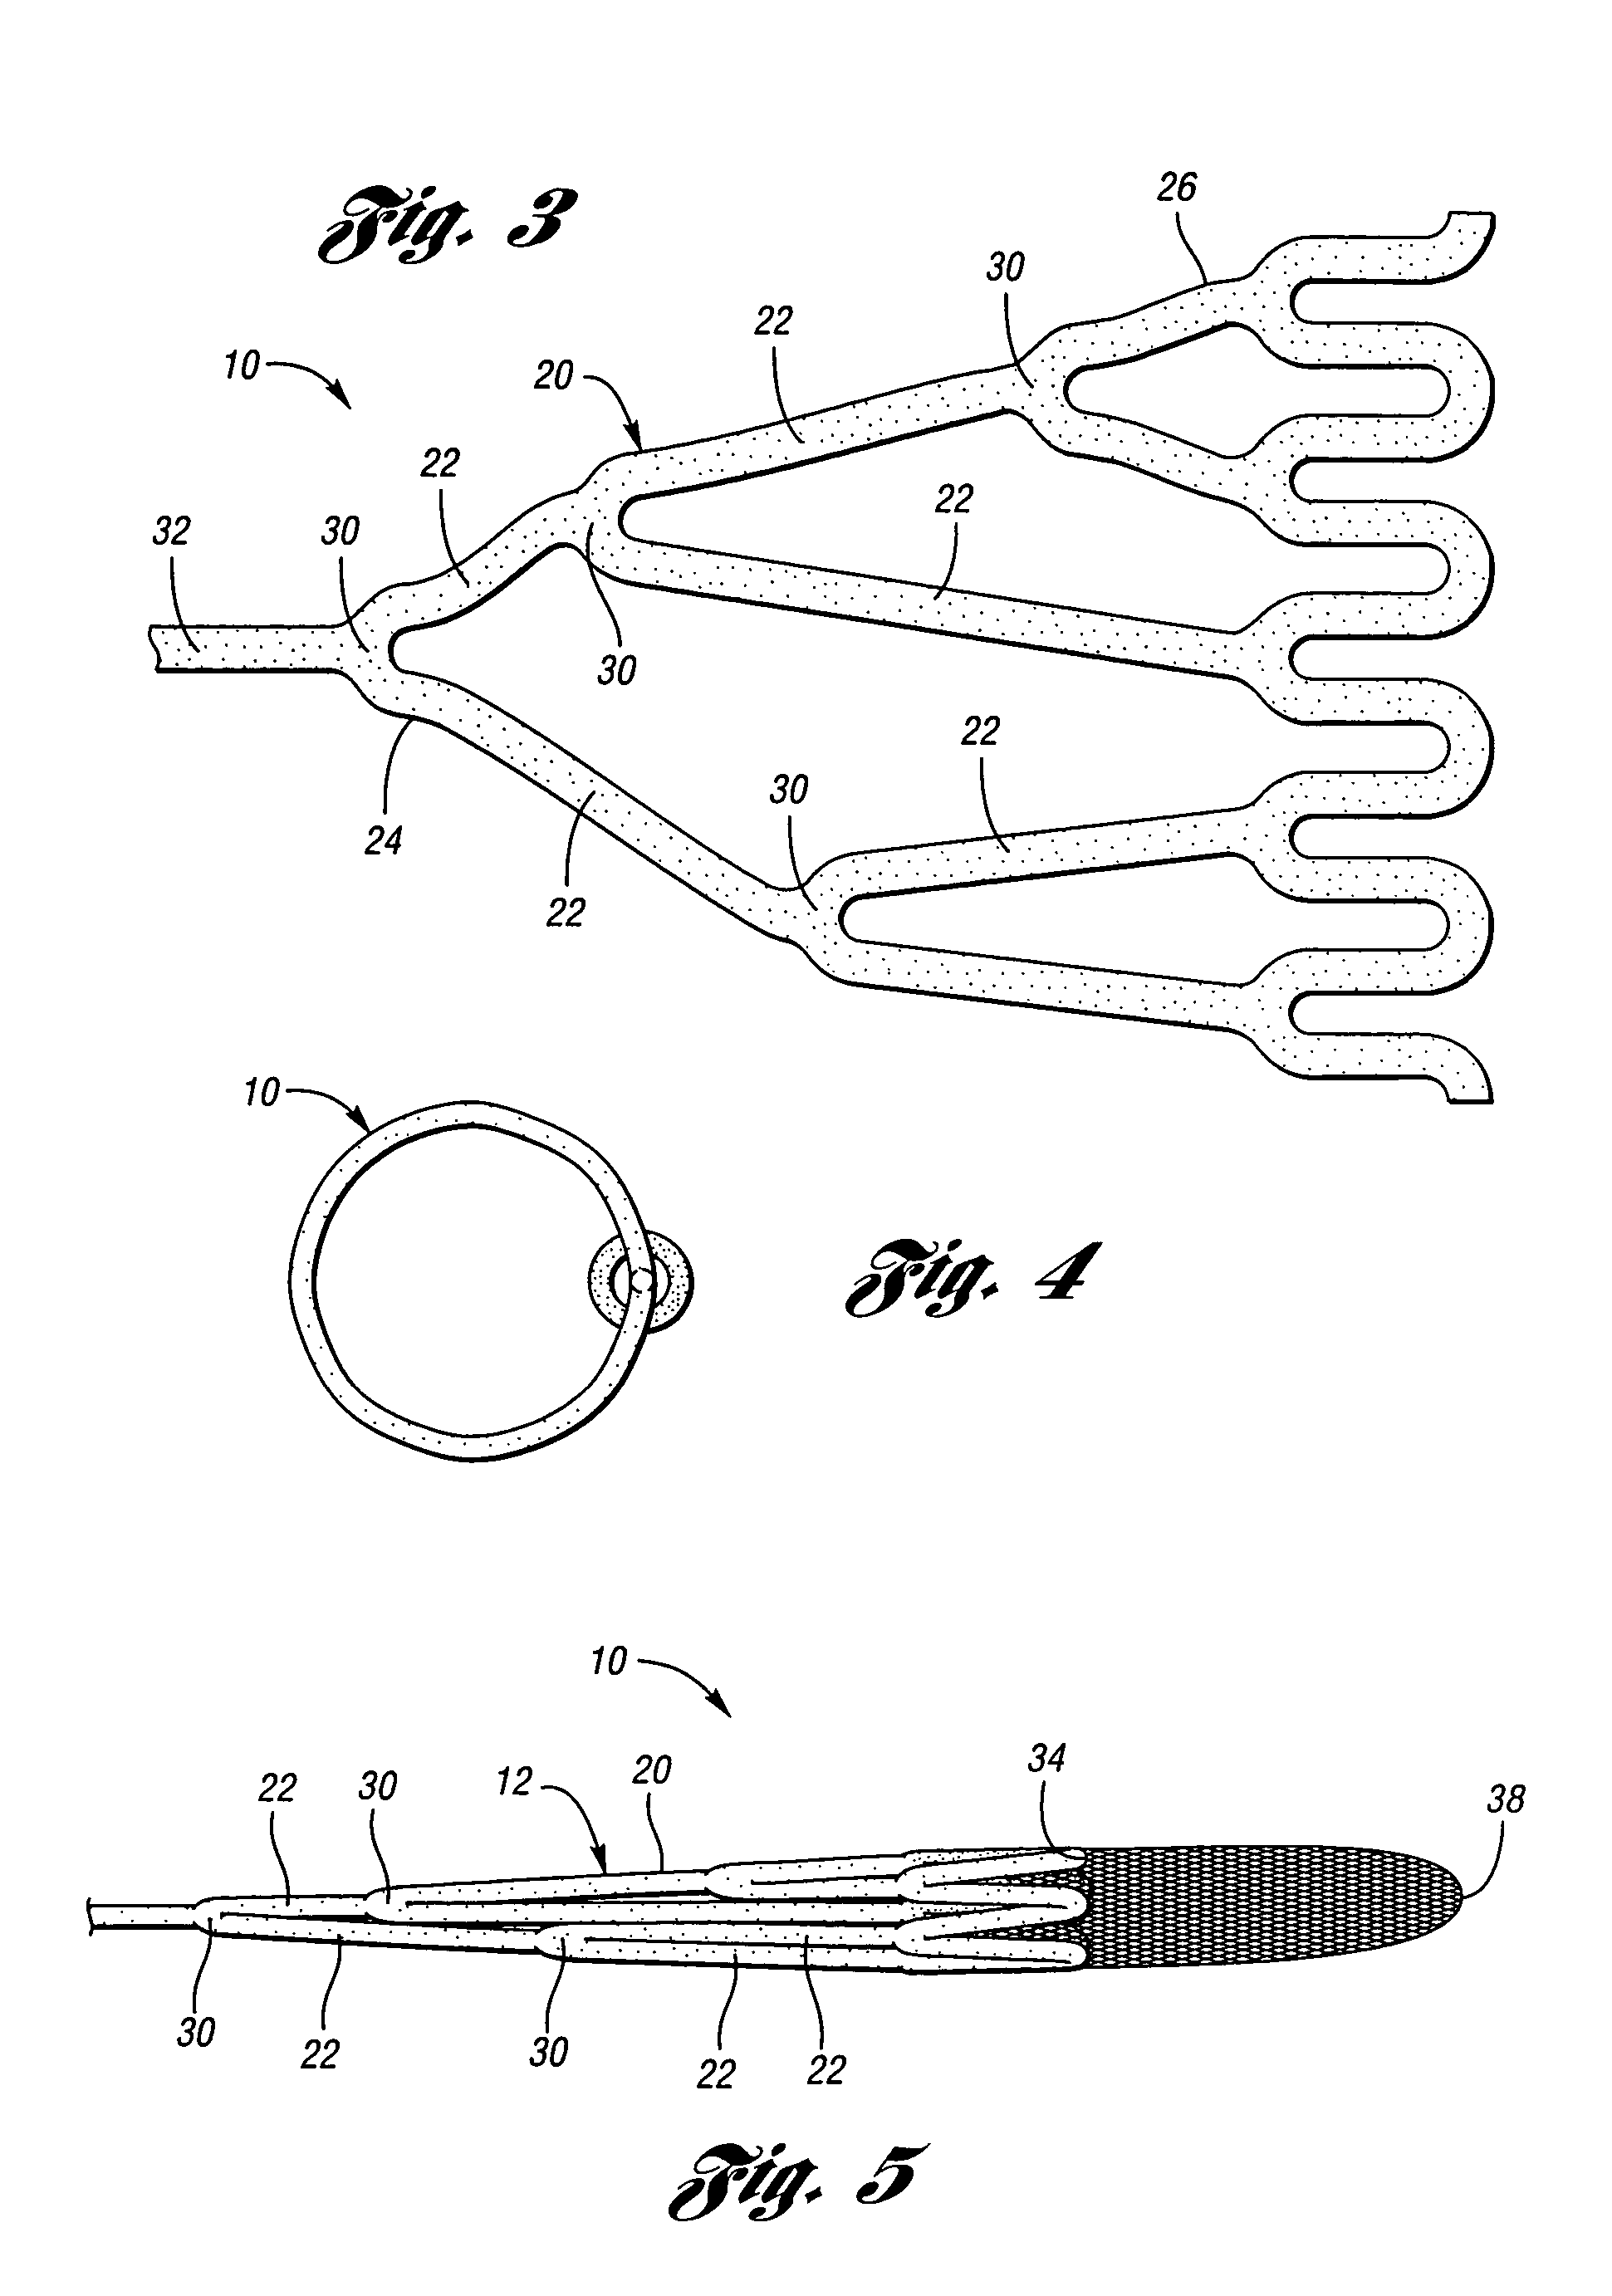 Embolic protection device having a reticulated body with staggered struts